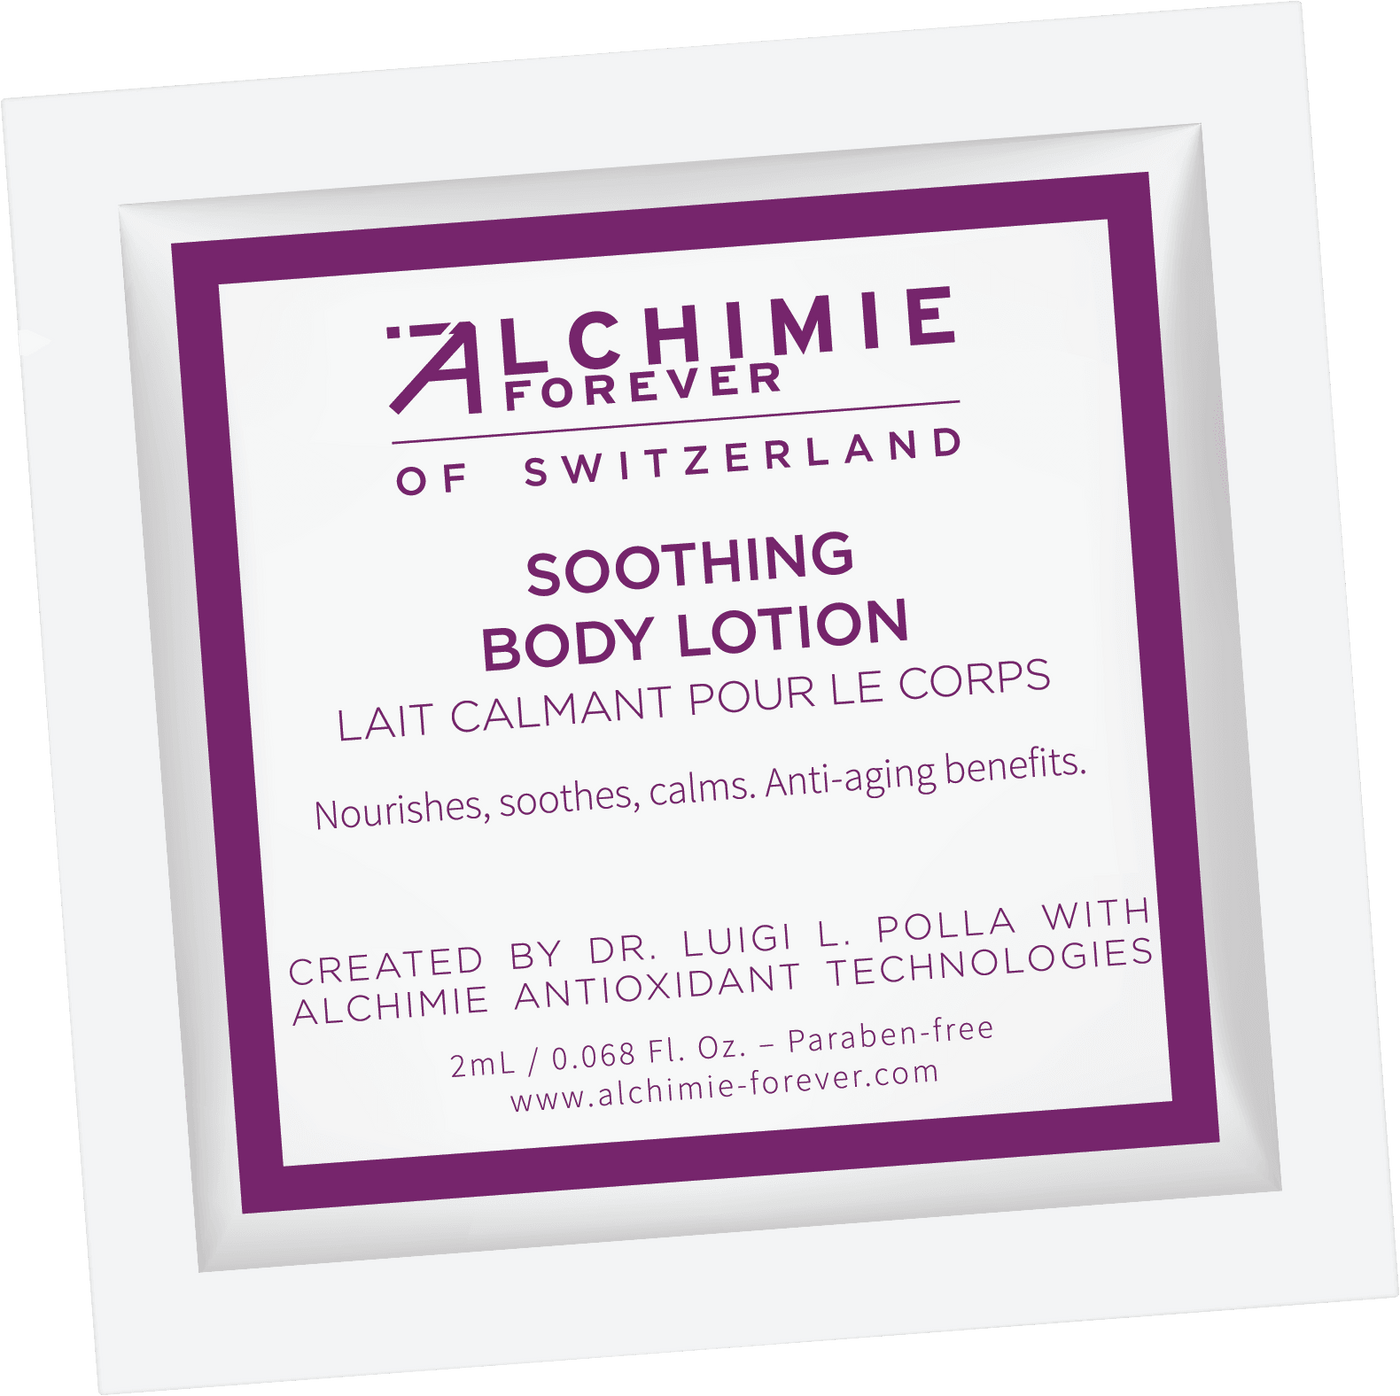 Soothing body lotion - Sample